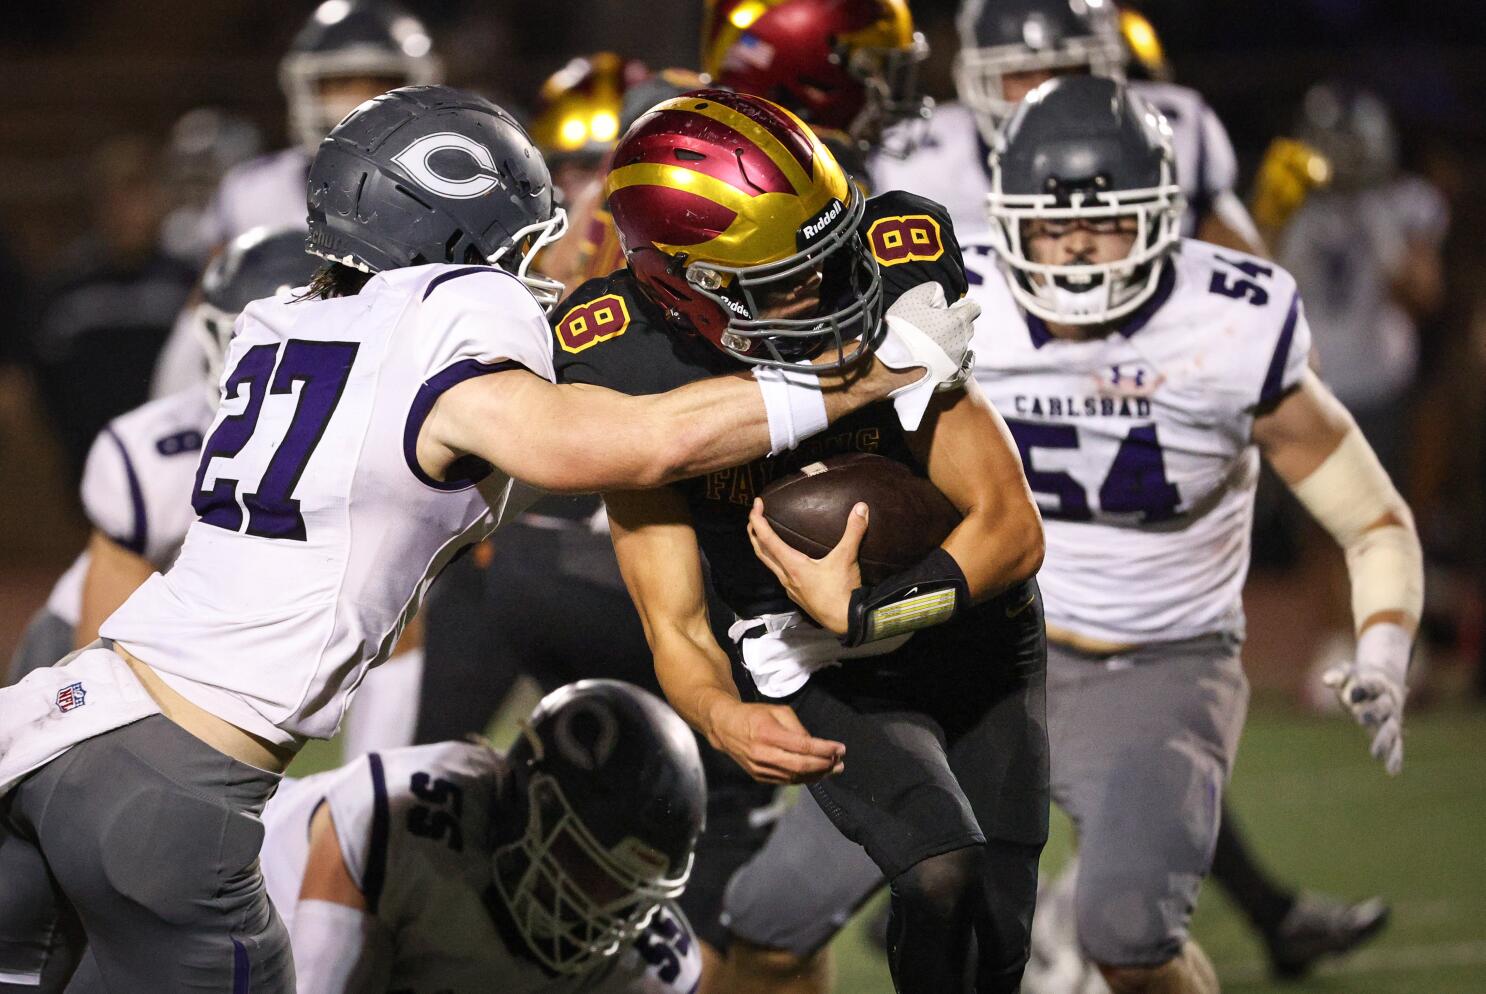 Cathedral Catholic shuts out Torrey Pines in football opener - Del Mar Times